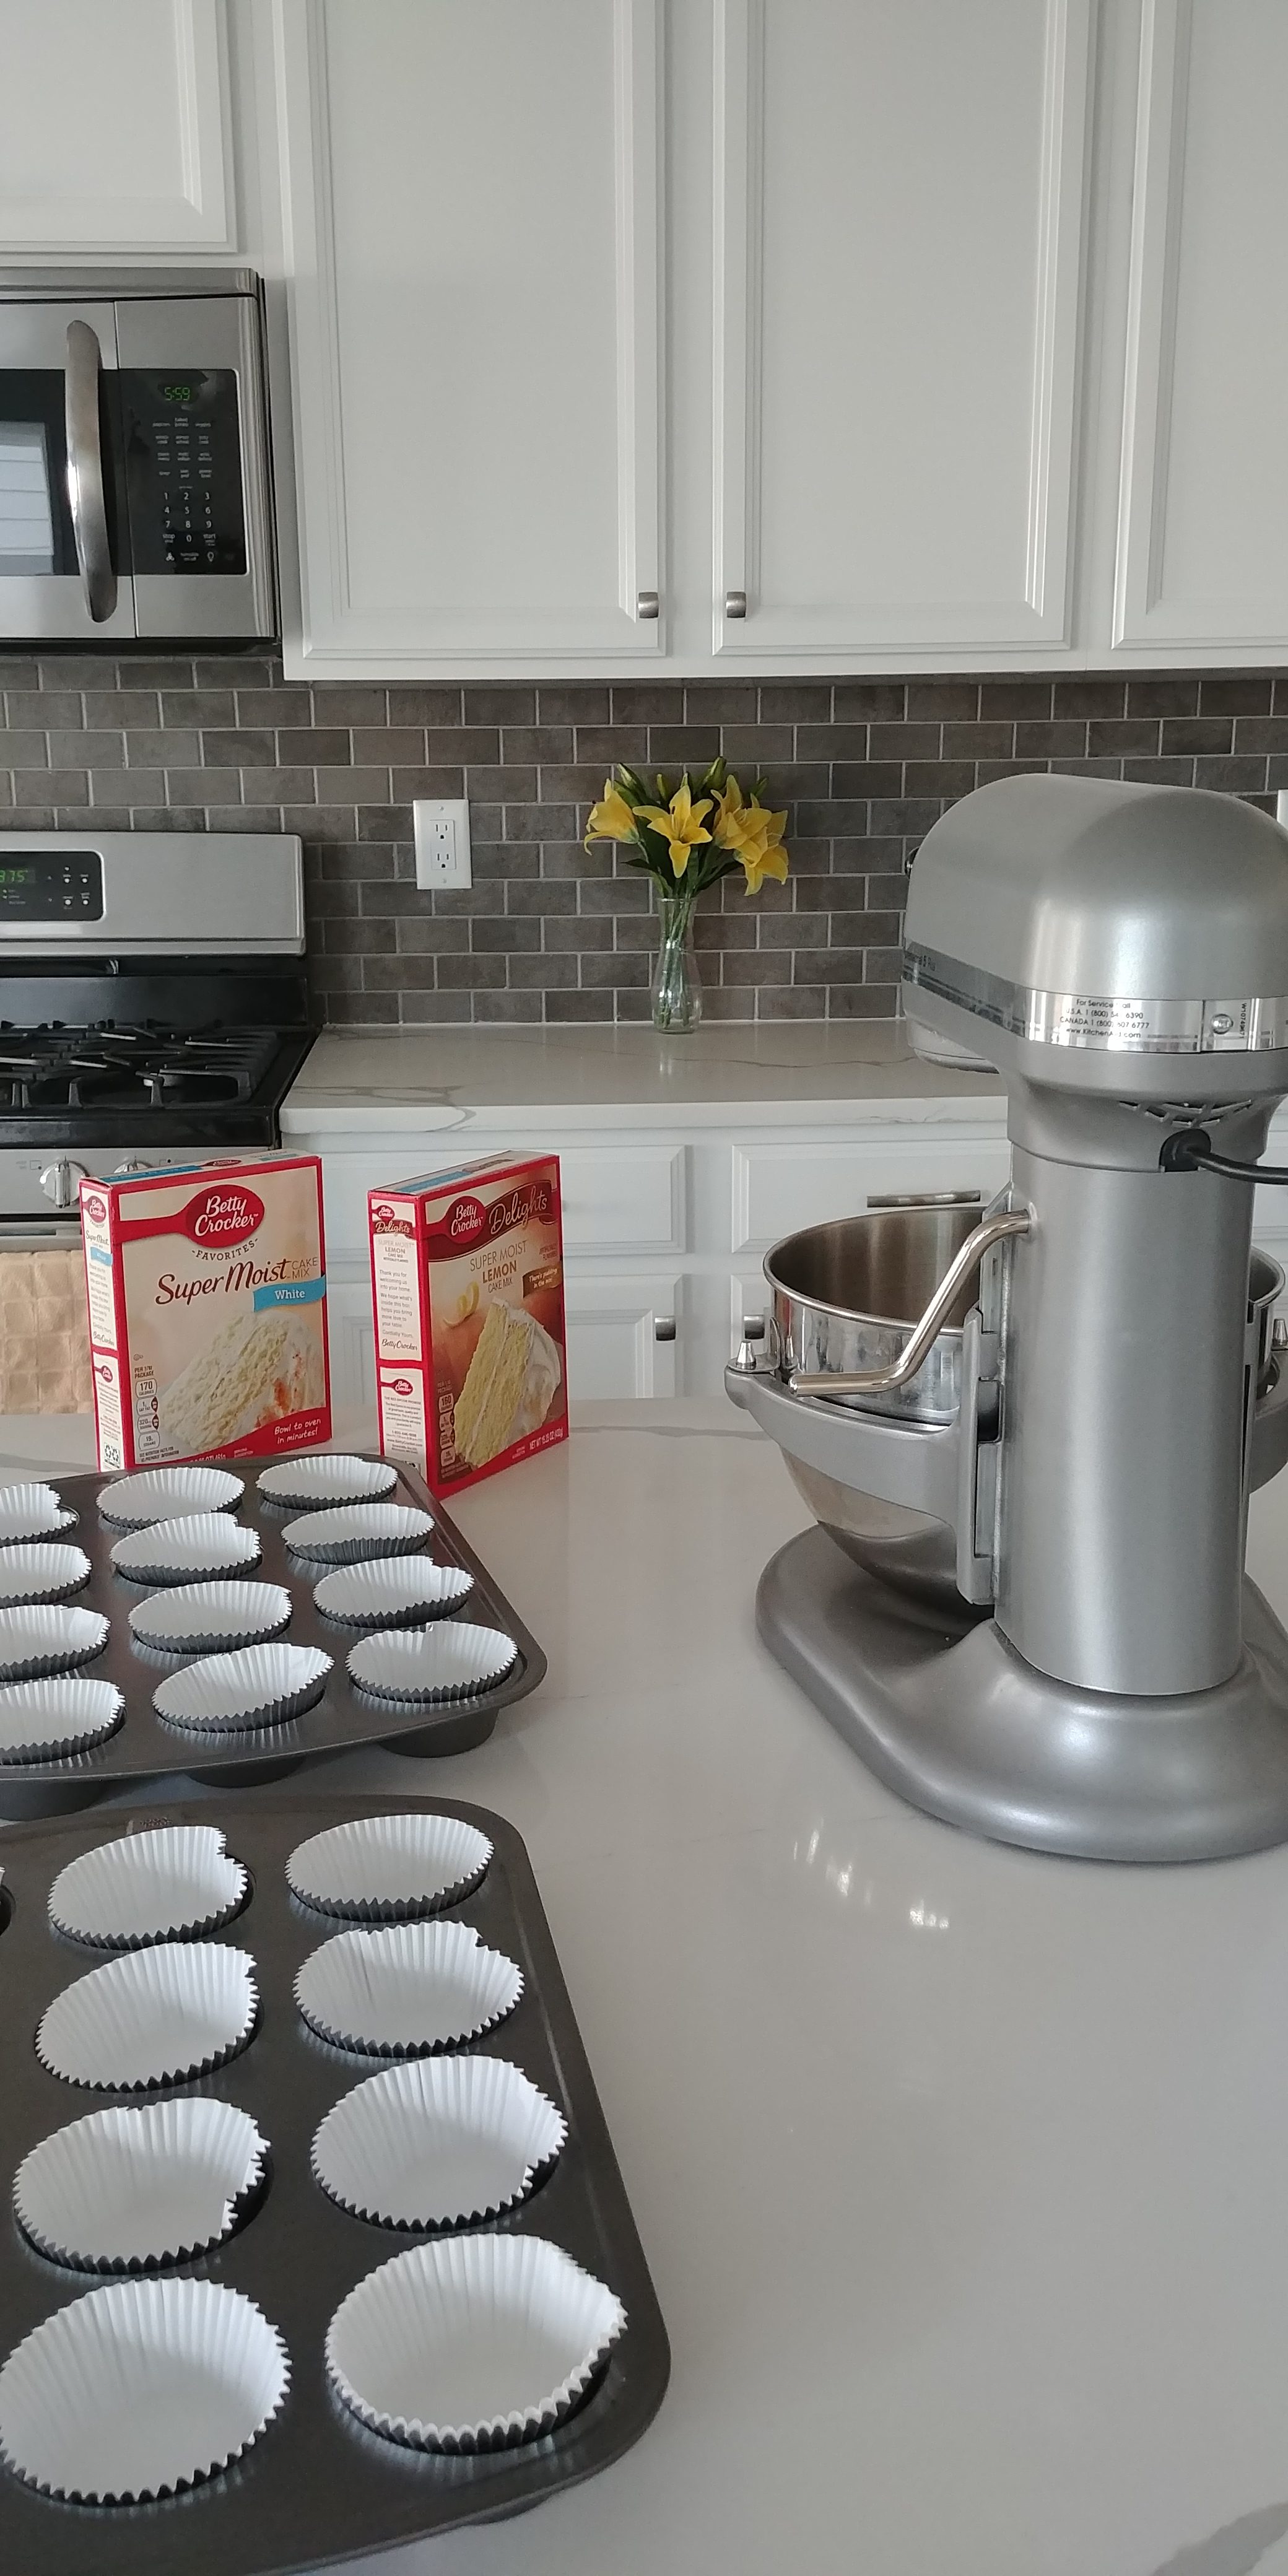 Wedding Cupcakes and Kitchen Aid